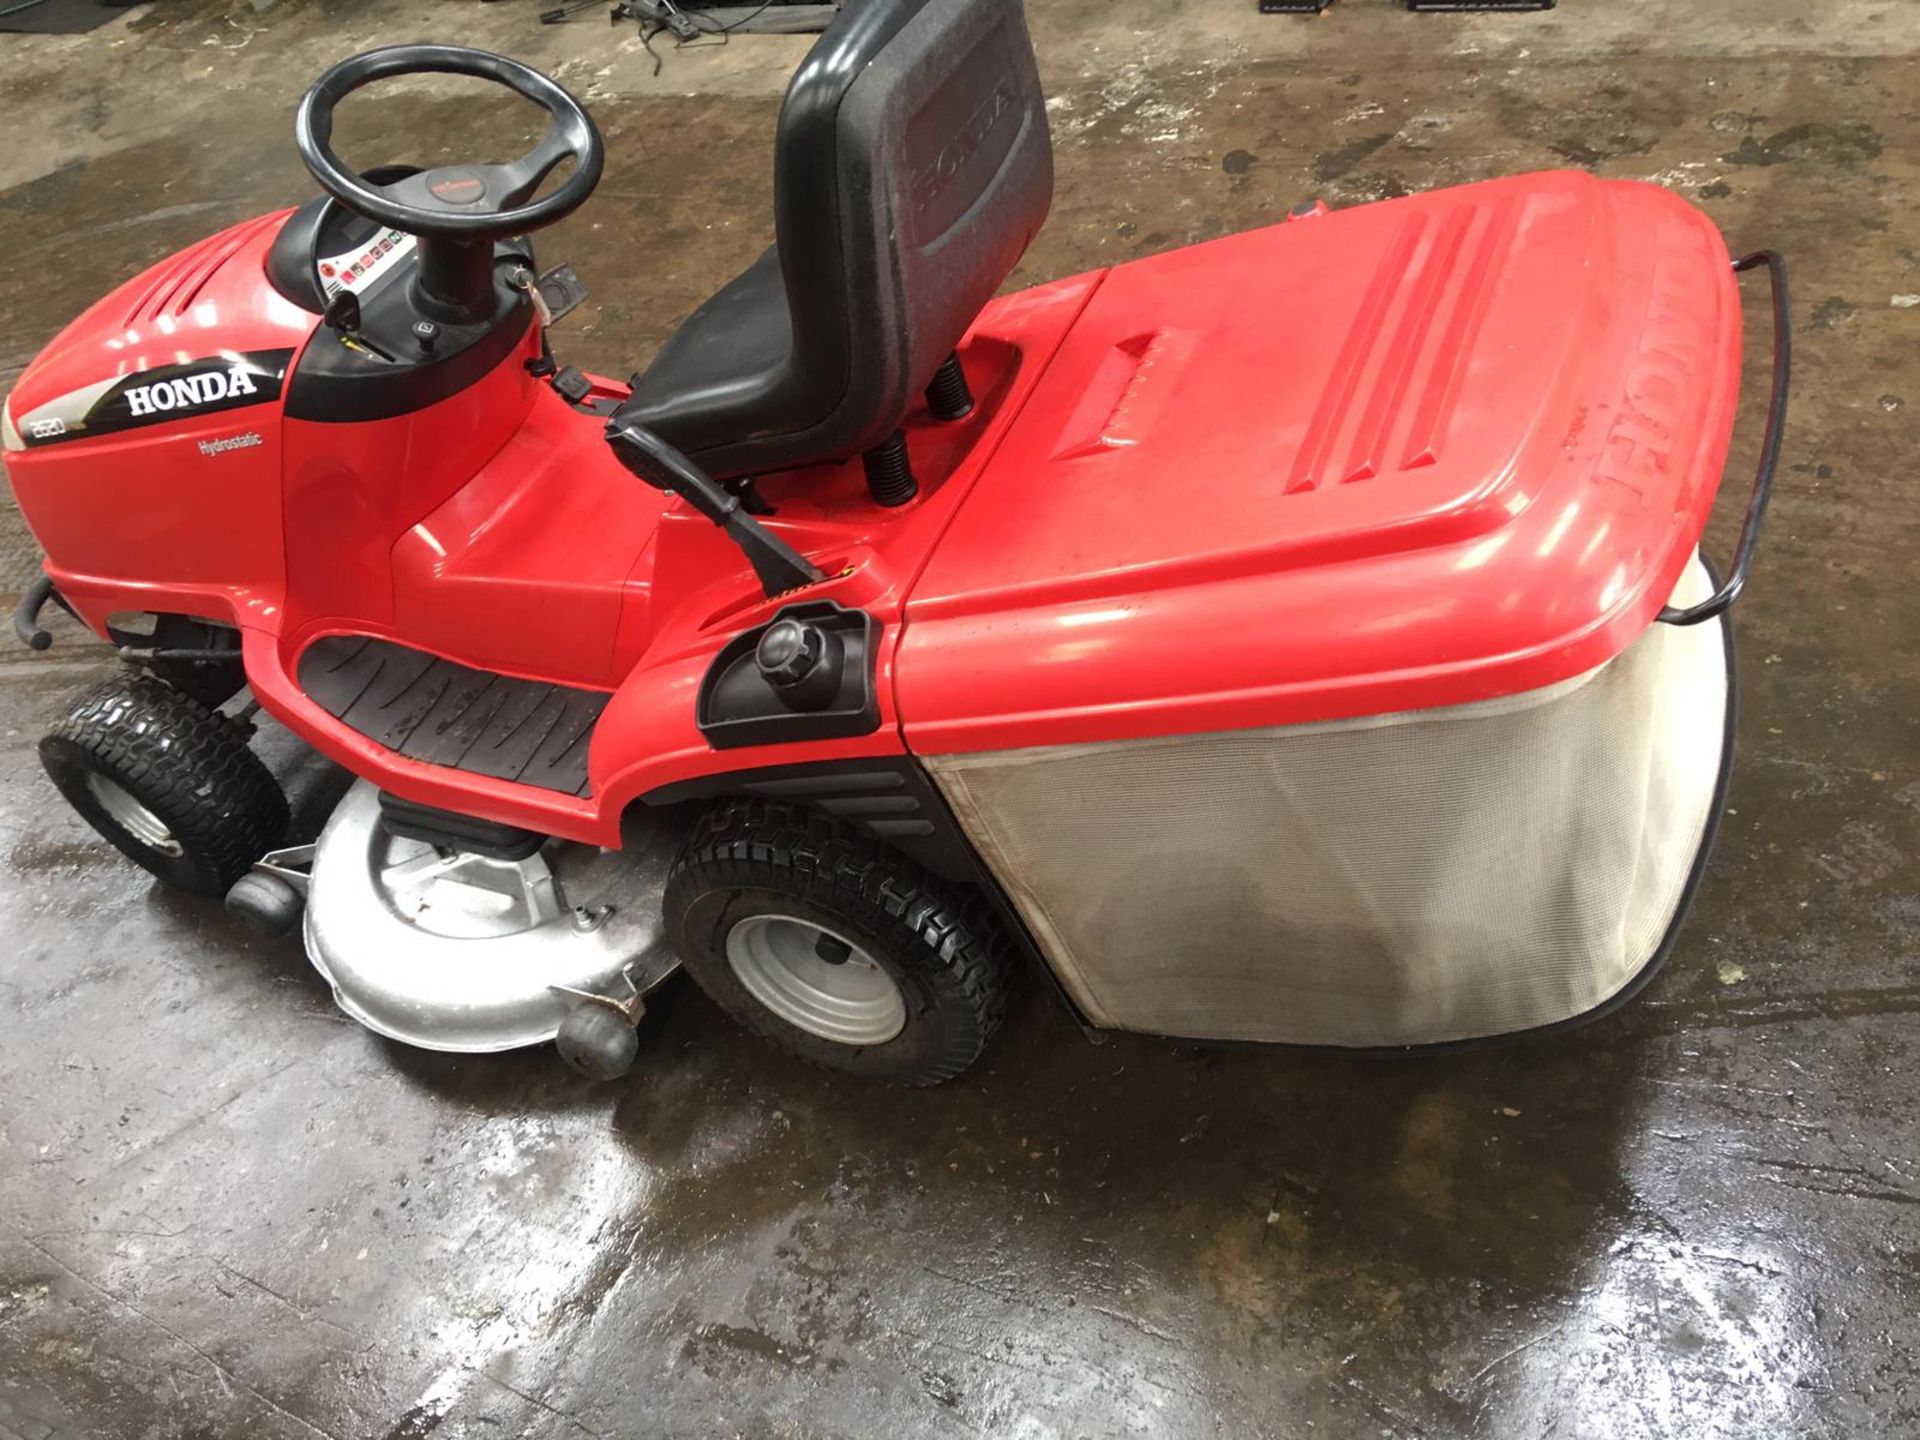 HONDA V-TWIN 2620 RIDE ON LAWN MOWER, HYDROSTATIC, STARTS AND RUNS, ELECTRIC TIP, ONLY 200.1 HOURS - Image 5 of 13